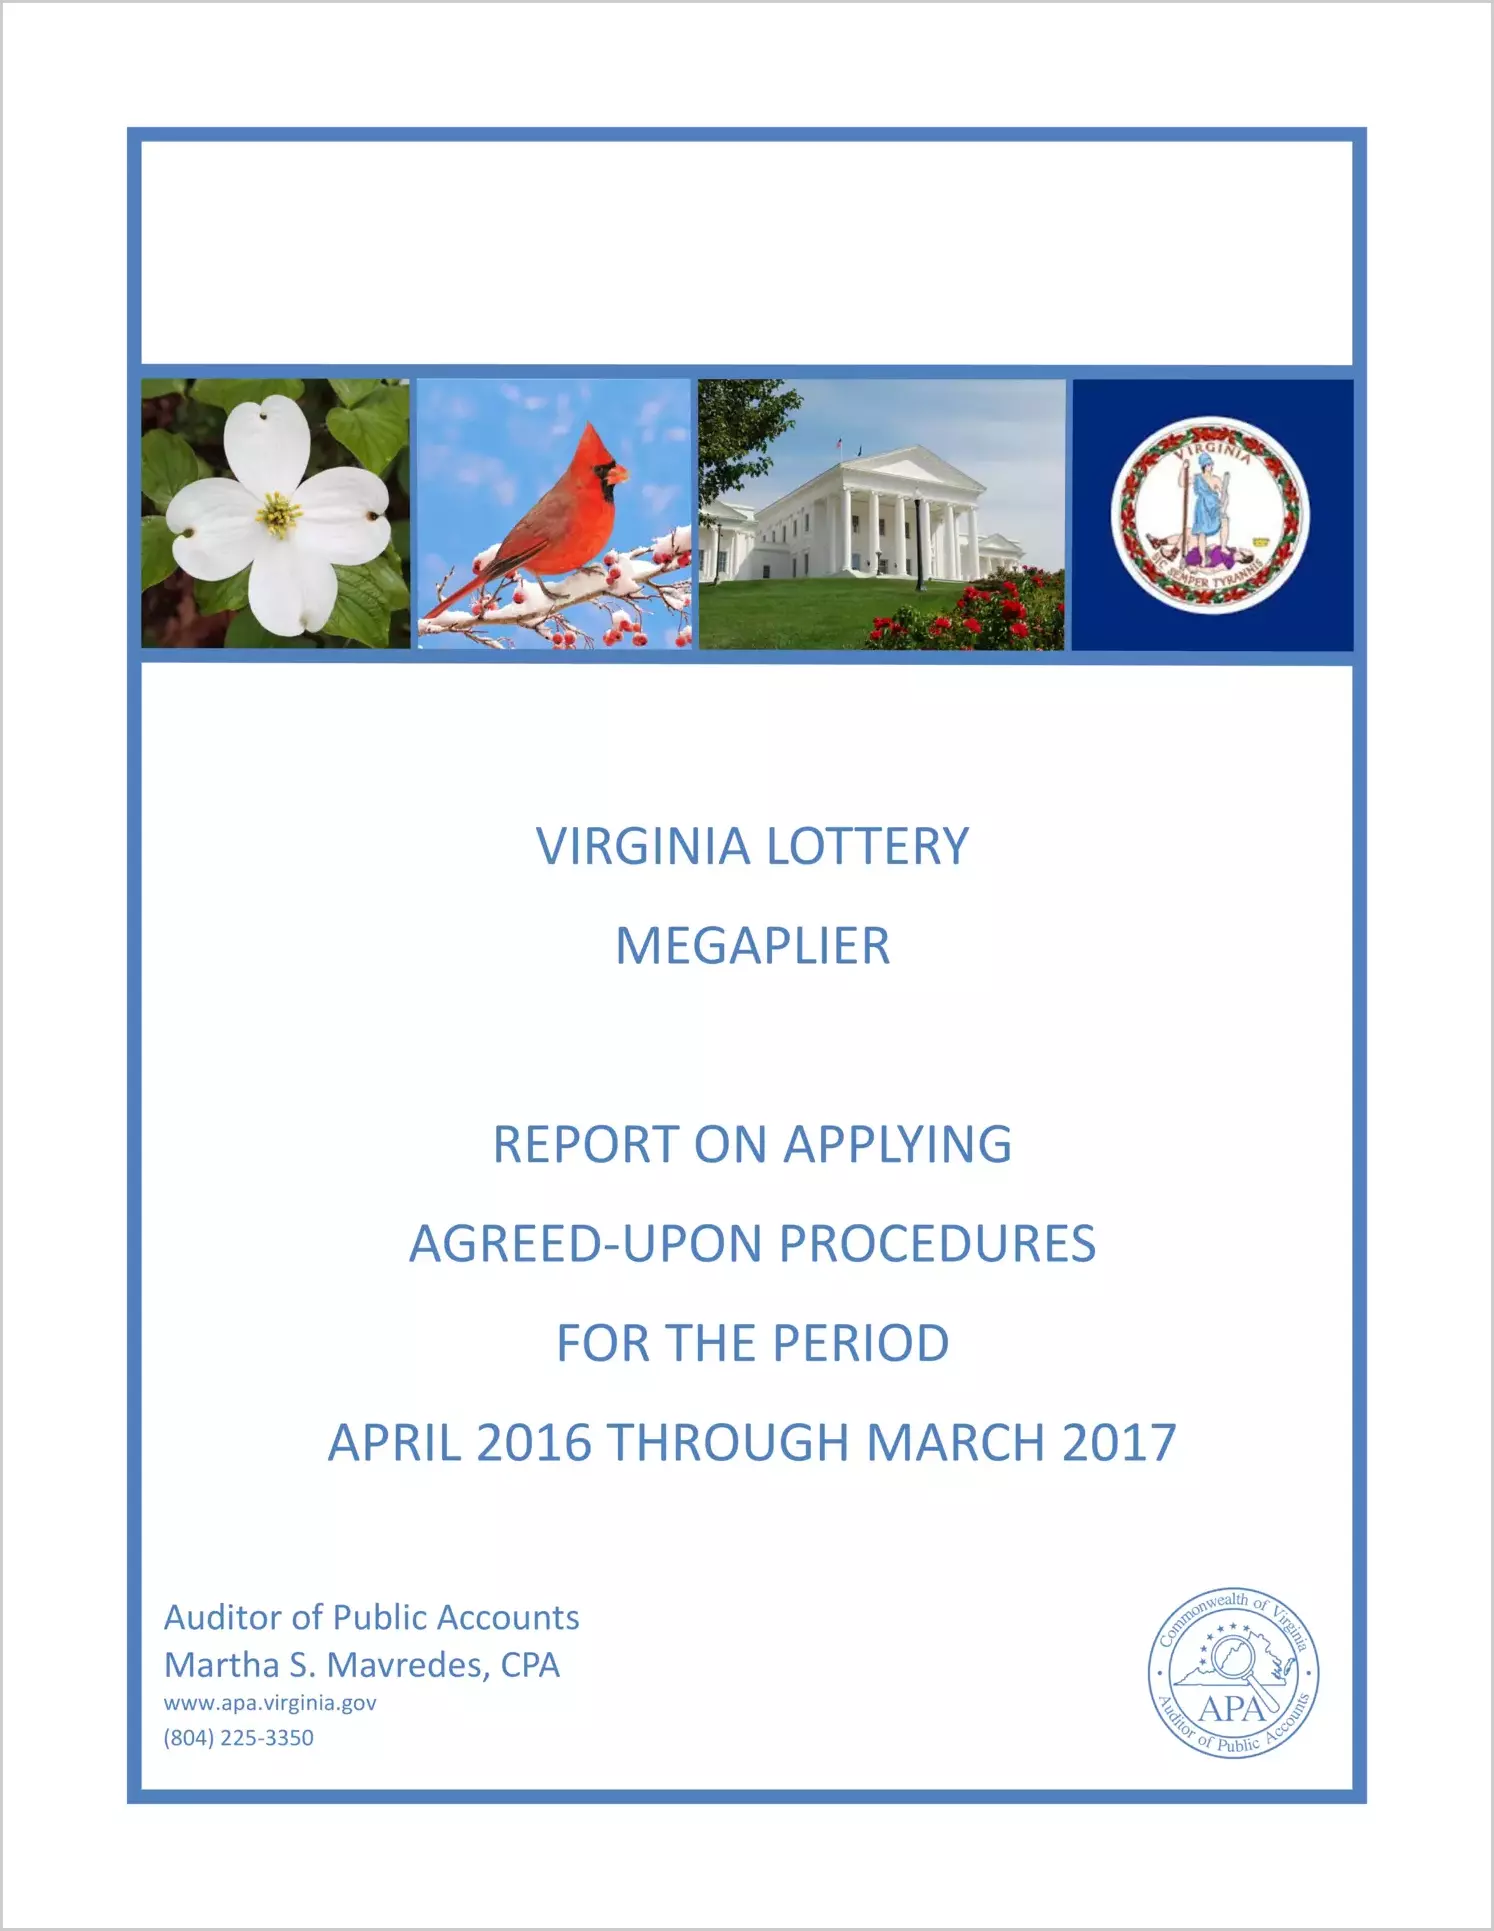 VA Lottery Megaplier report on Applying Agreed-Upon Procedures for the period April 2016 through March 2017